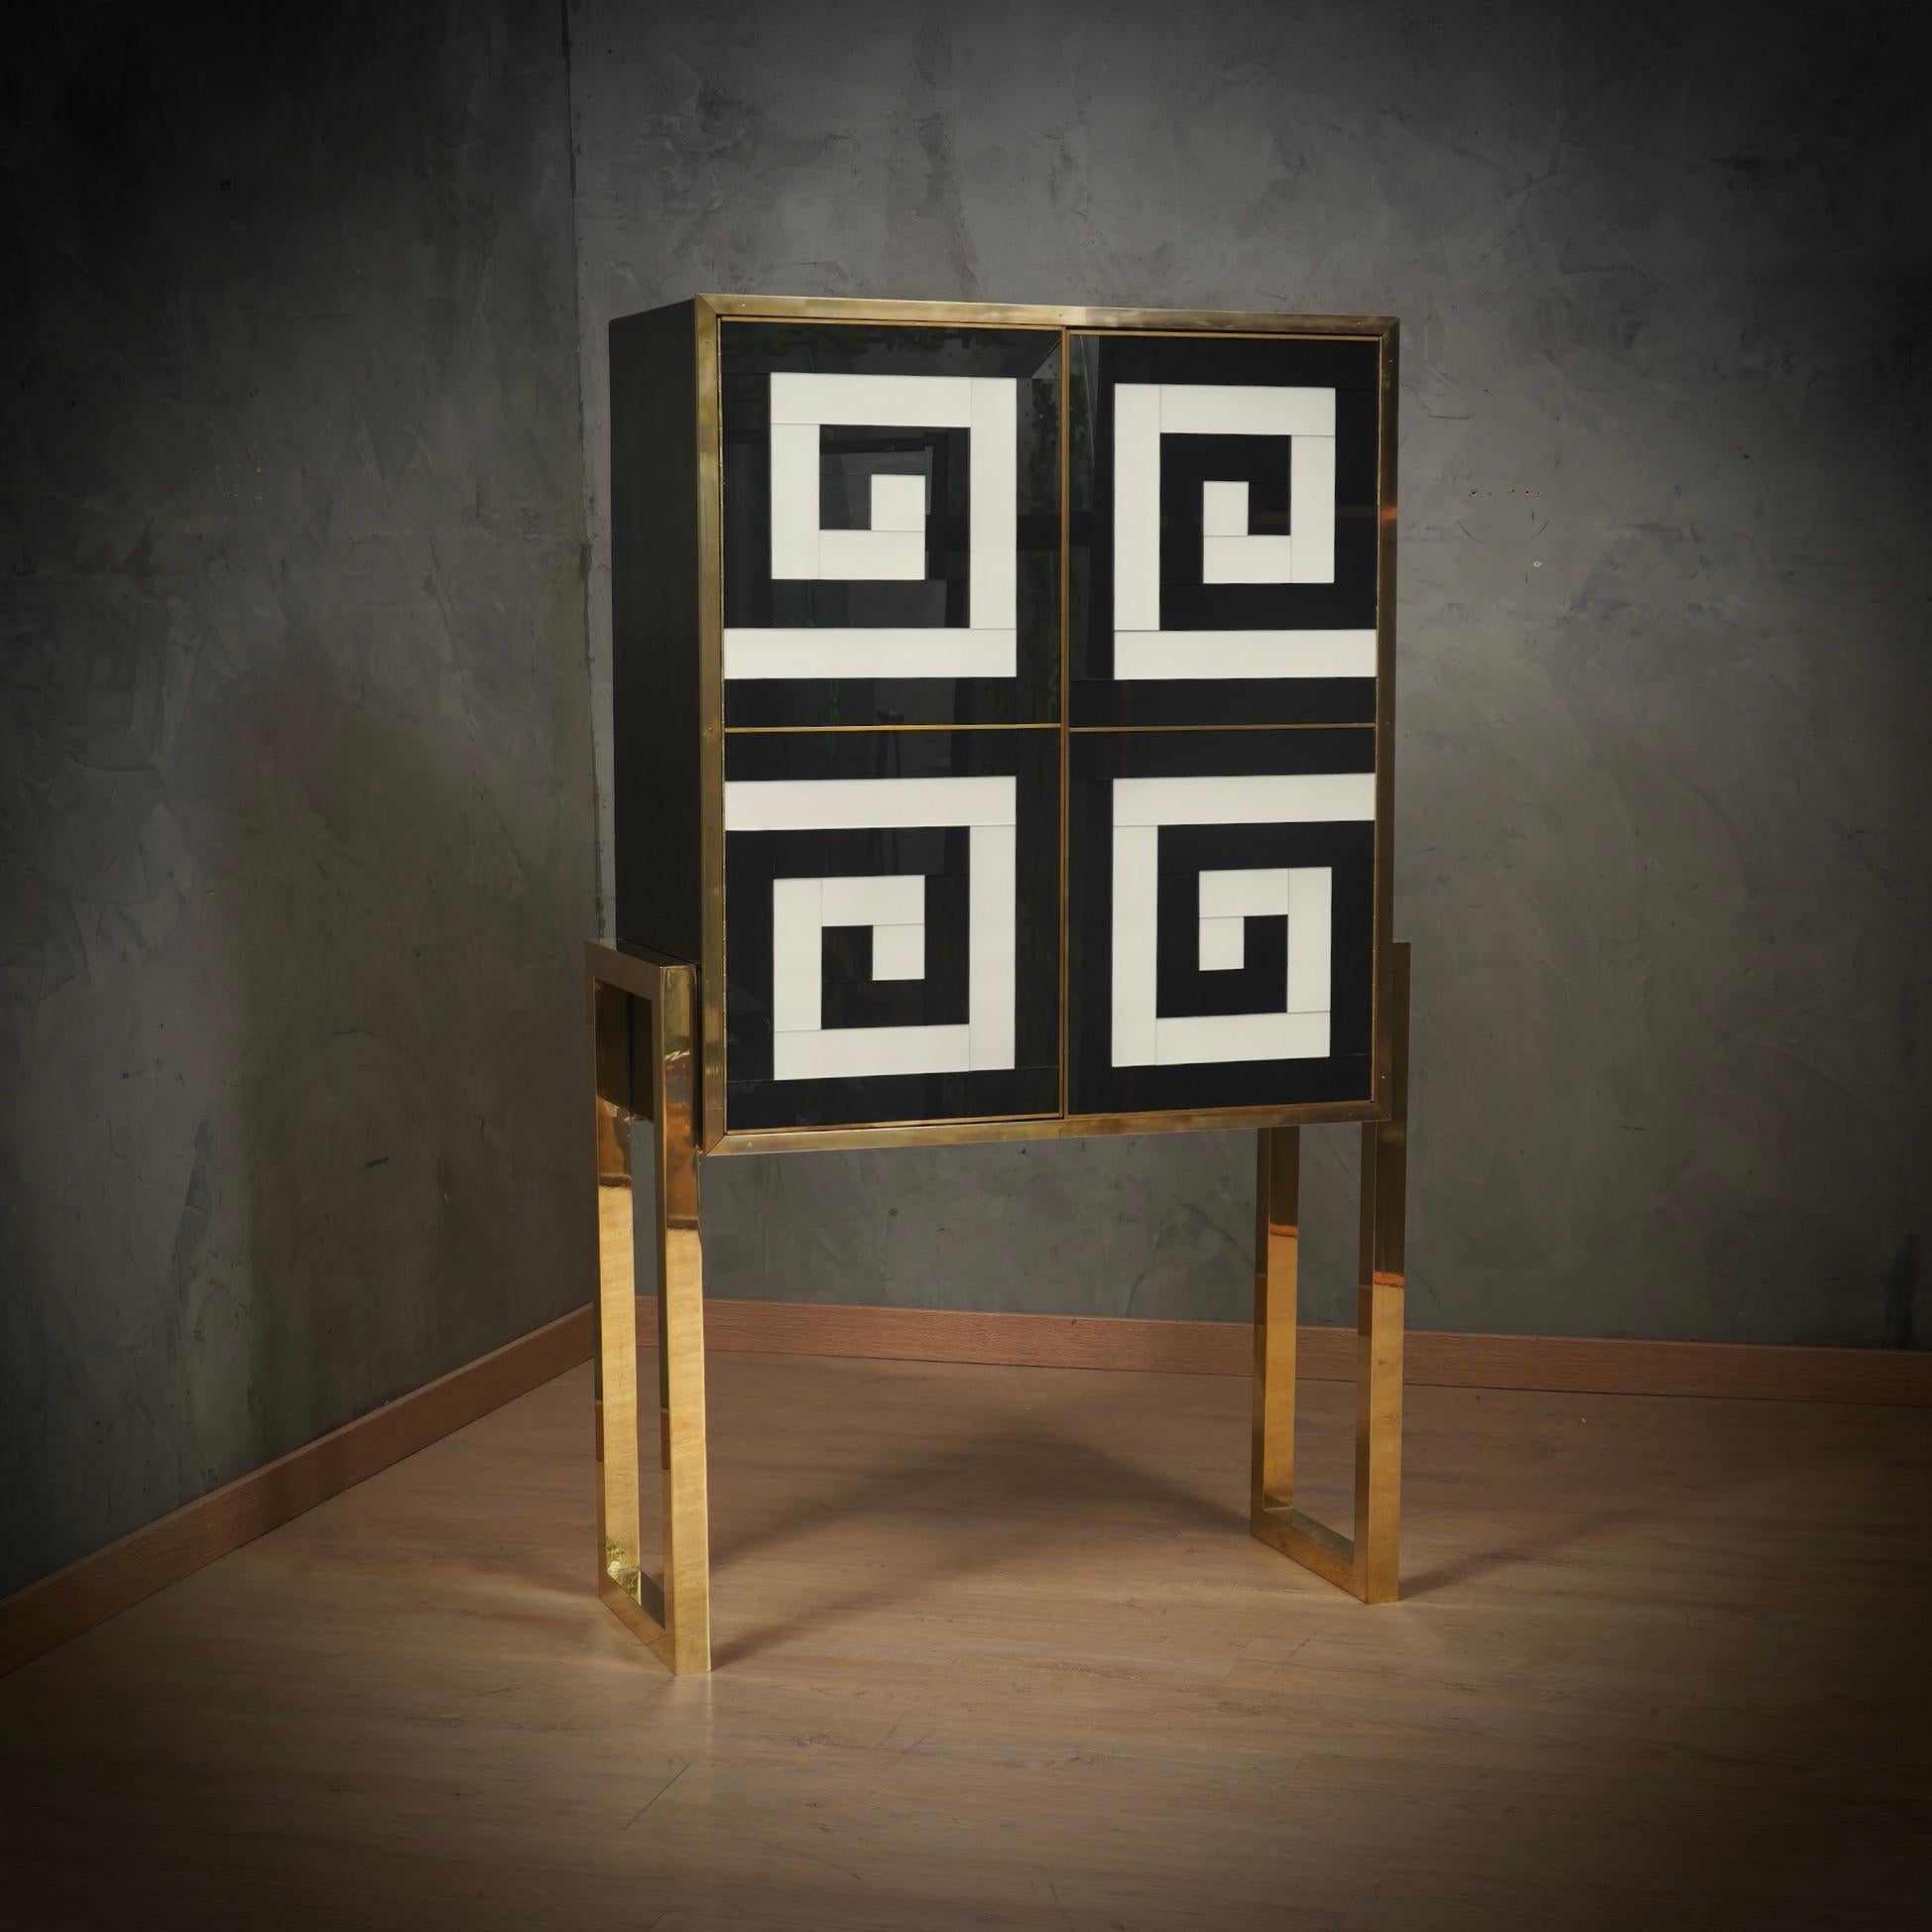 The piece of furniture is made up of square and decisive lines, with the use of basic colours, such as white and black, and the expressiveness of elegant materials such as brass and artistic glass, its expressive strength and its particular